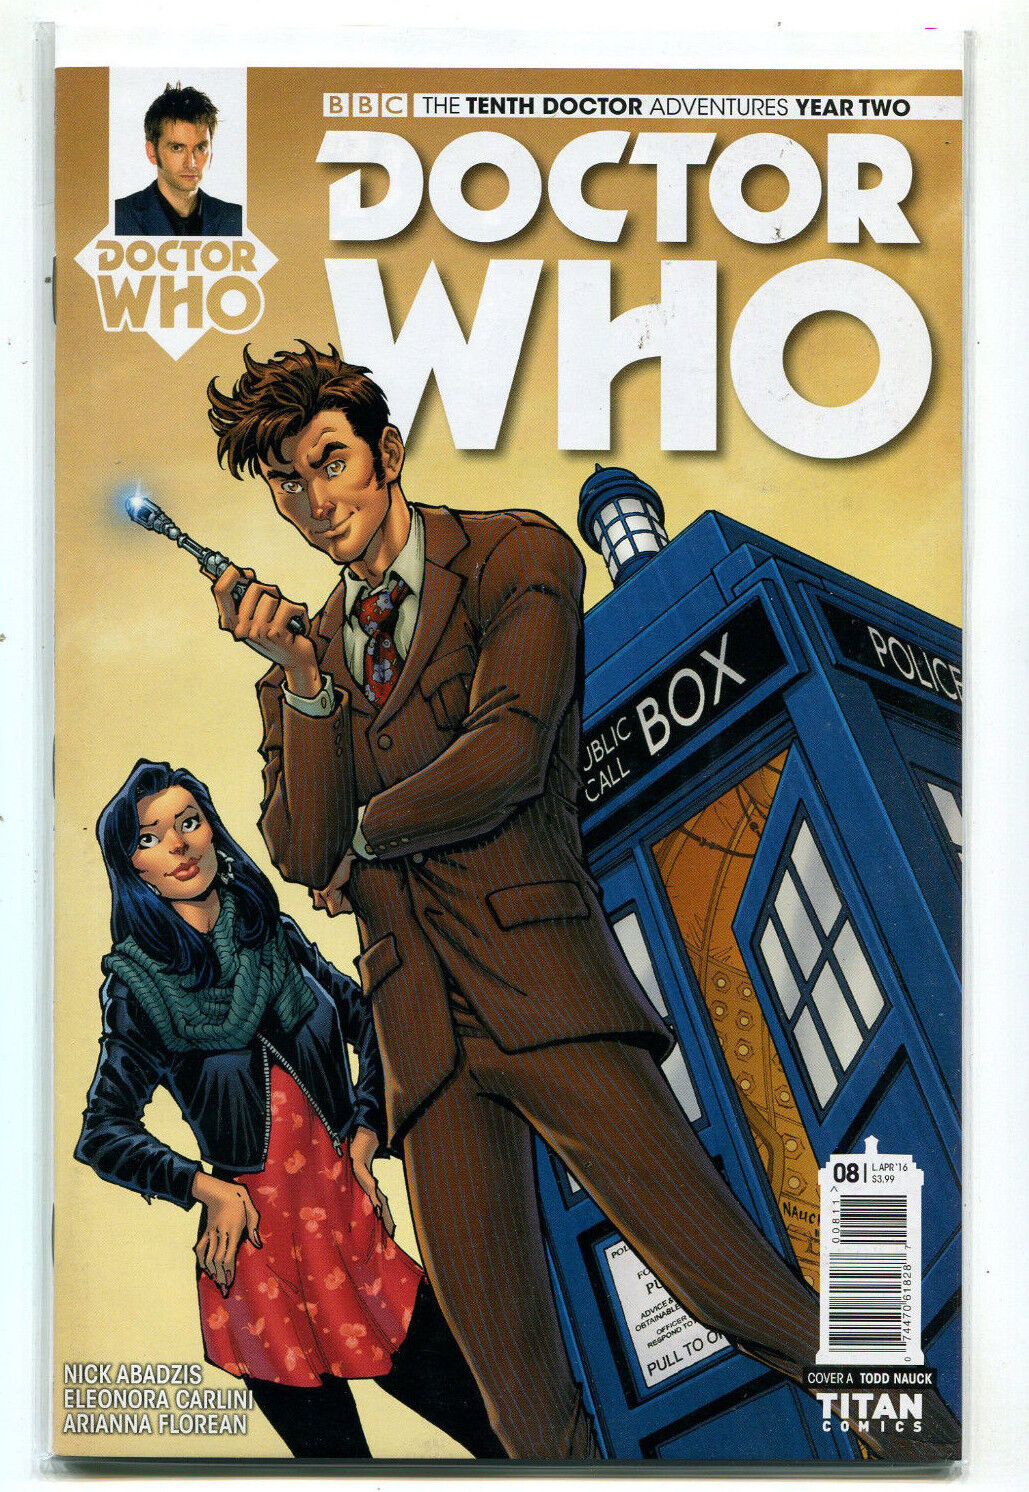 Doctor Who #8 Nm Tenth Doctor Year Two  Cover A  Todd Nauck  Titan Comics MD10